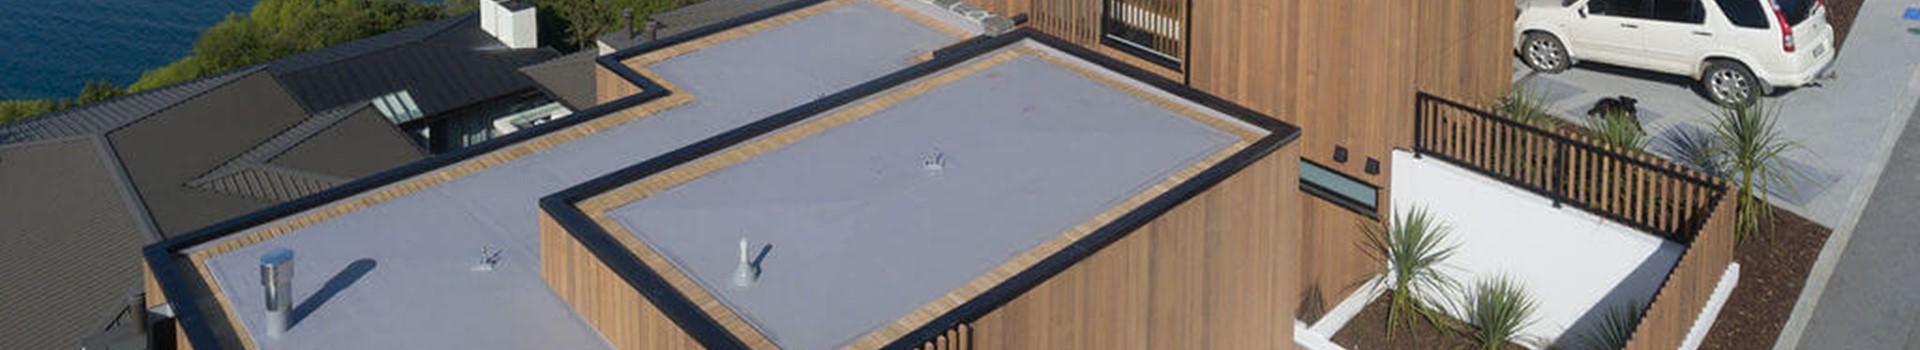 WarmRoof with Enviroclad